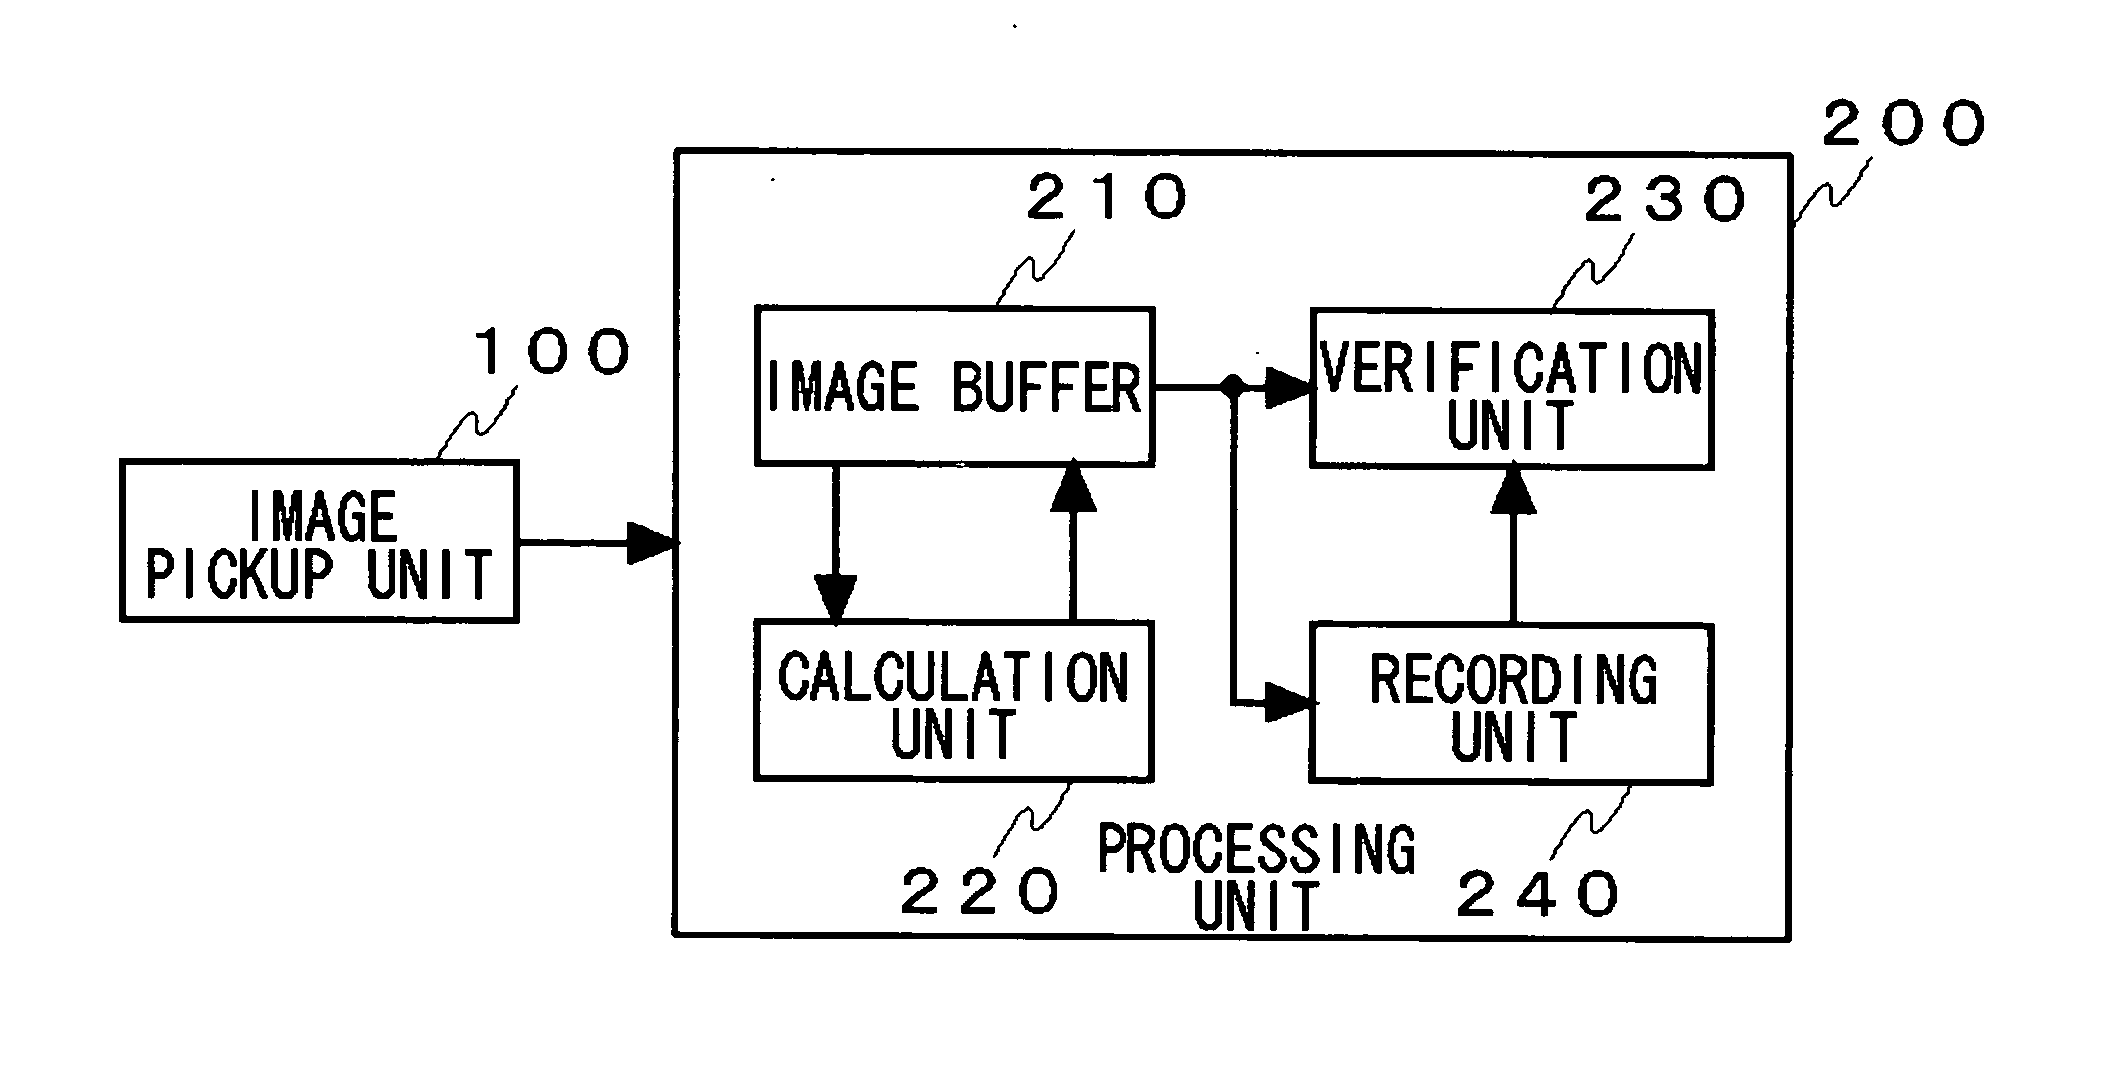 Method and apparatus for acquiring images, and verification method and verification apparatus